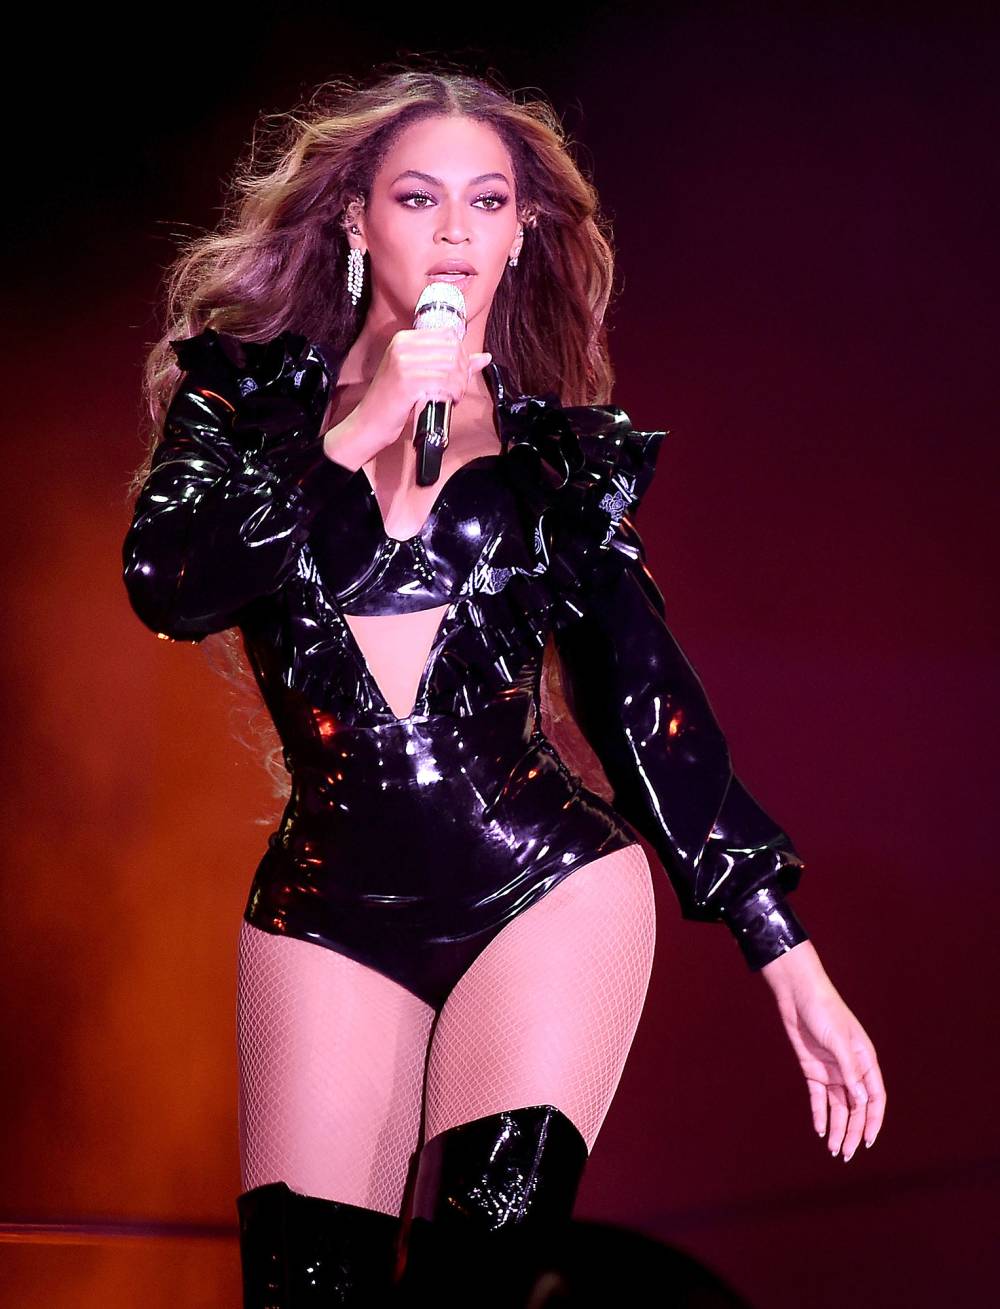 Beyonce Becomes Most Grammy-Awarded Female Artist Performing